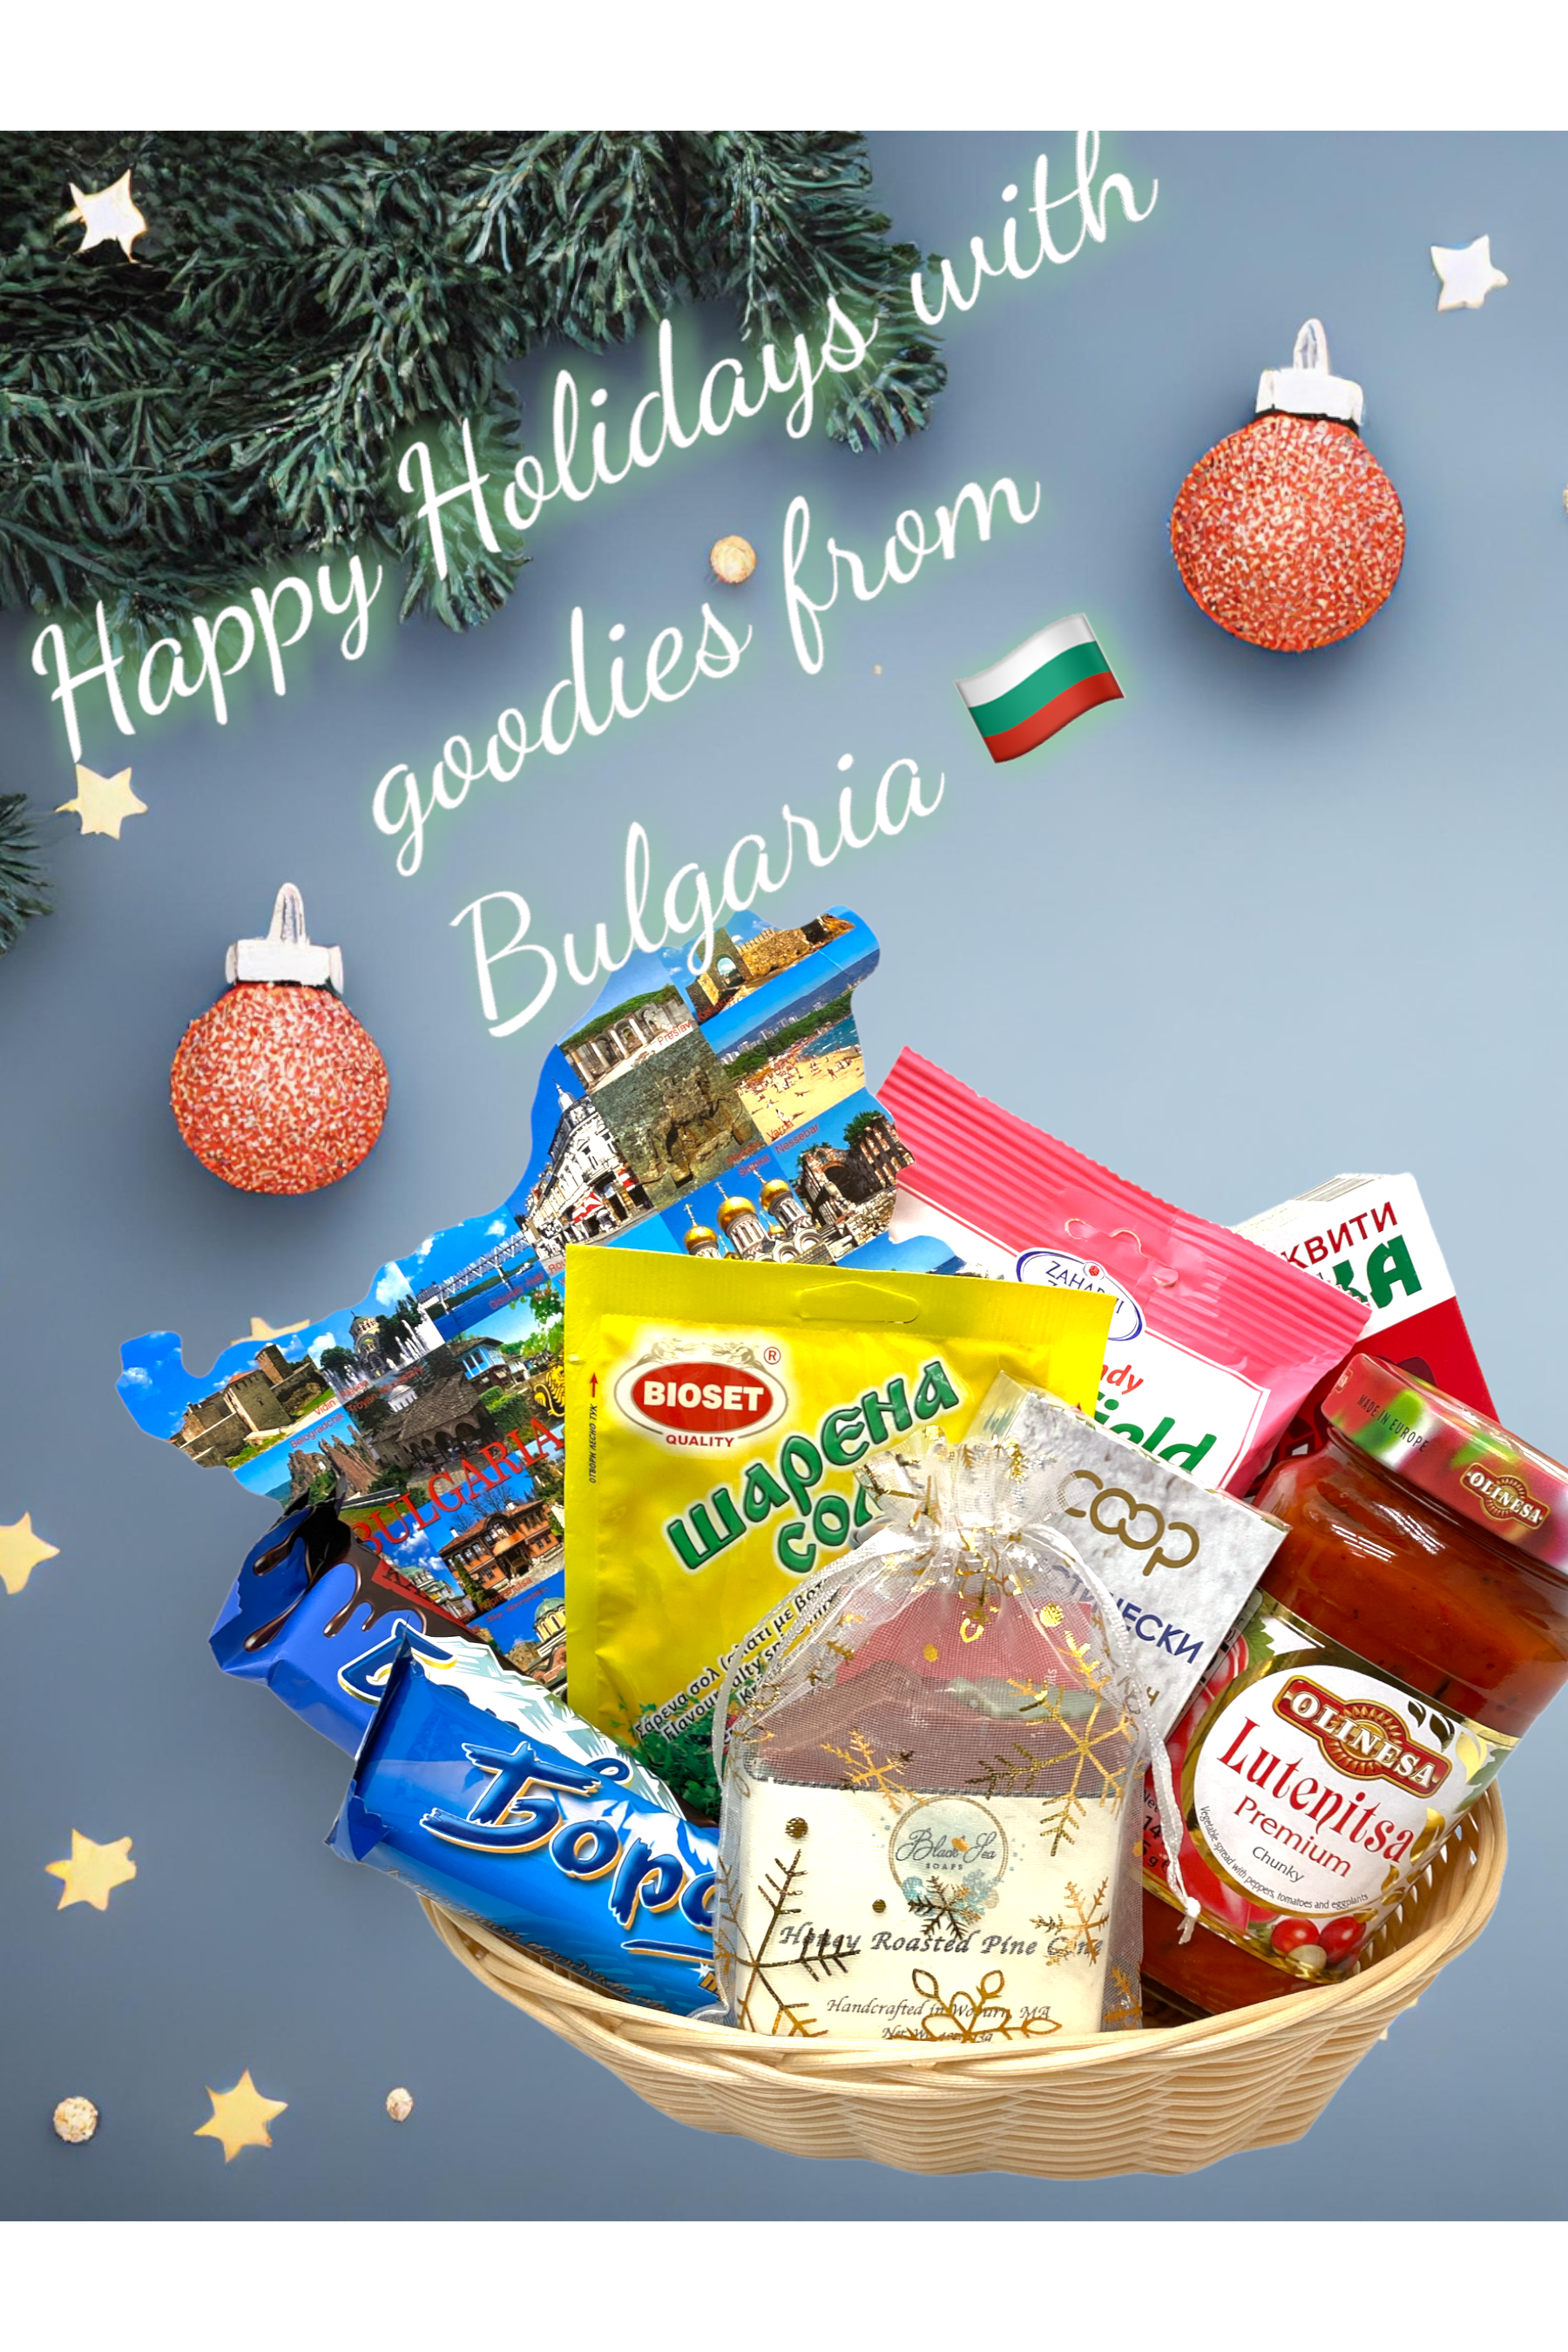 Gift Basket - Happy Holidays with goodies from BULGARIA